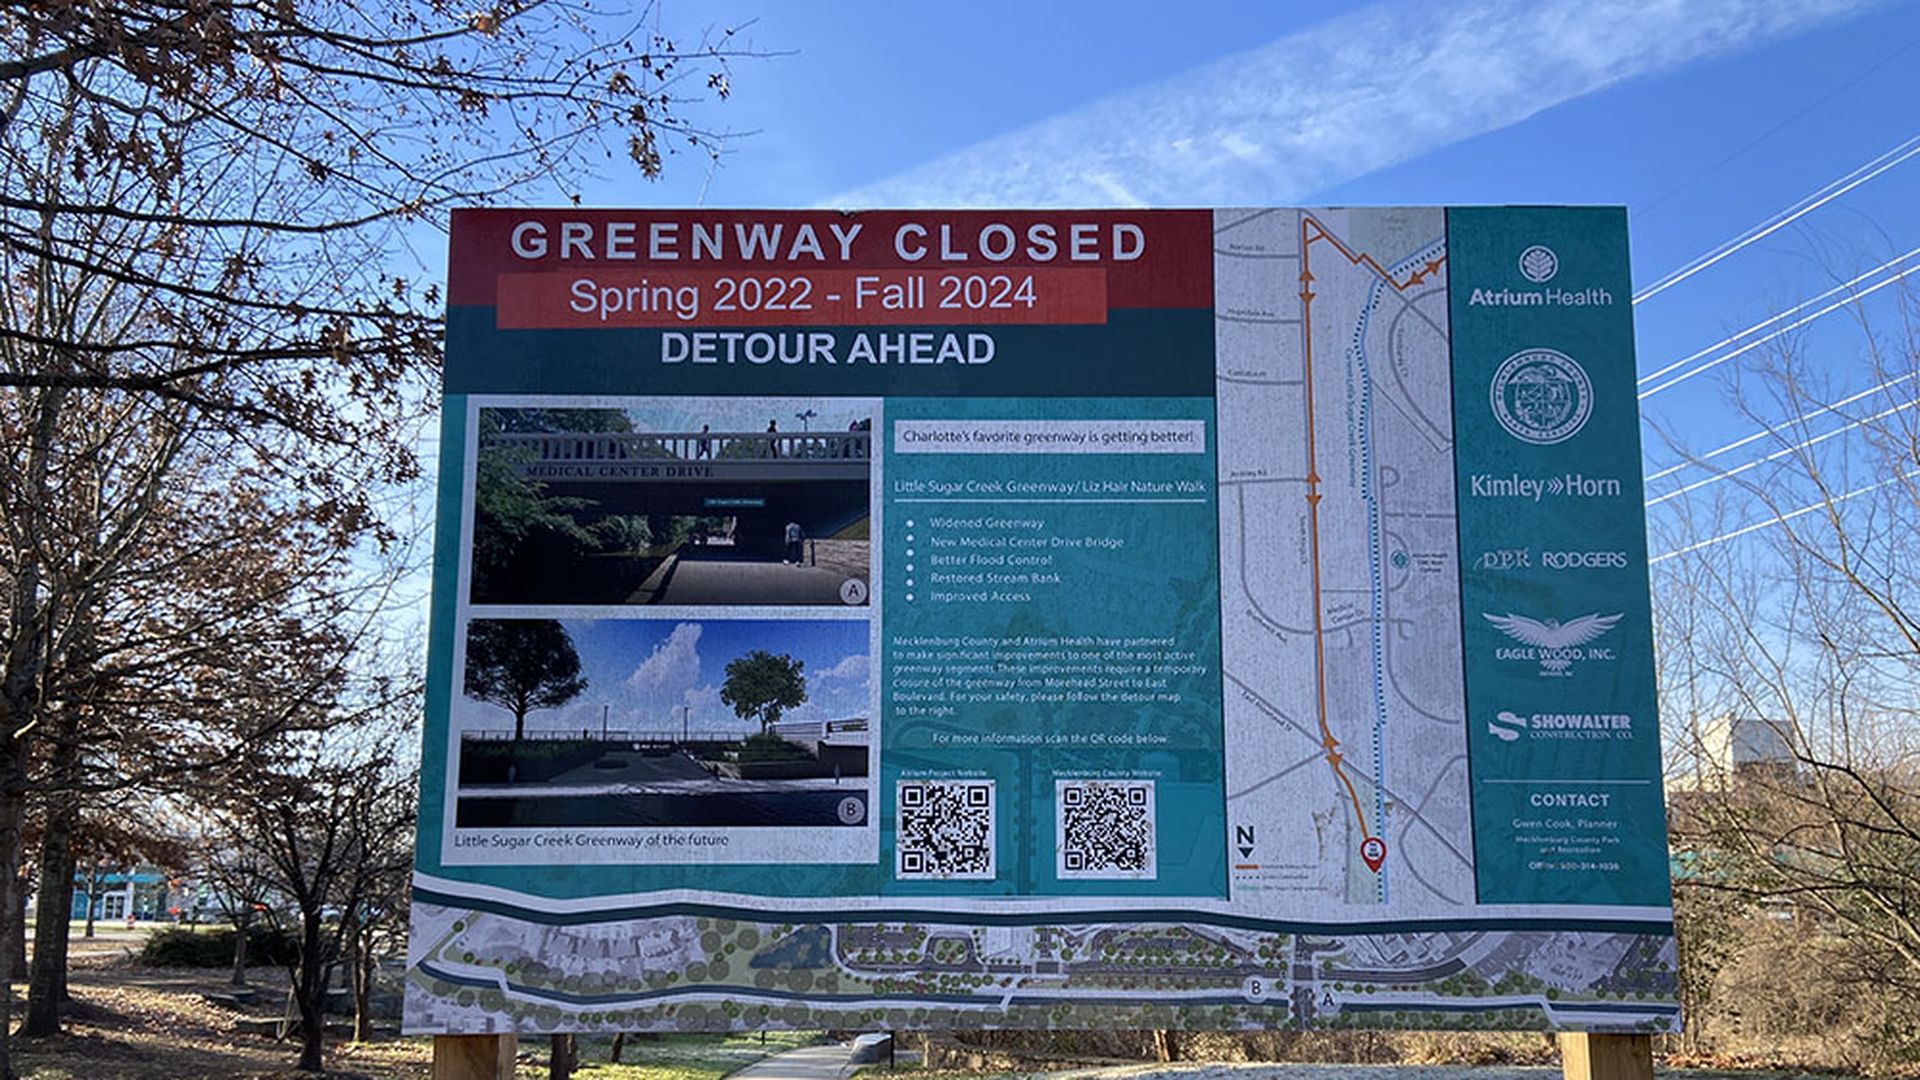 Little Sugar Creek Greenway from Morehead Street to Freedom Park is expected to reopen this fall. Photo: Ashley Mahoney/Axios